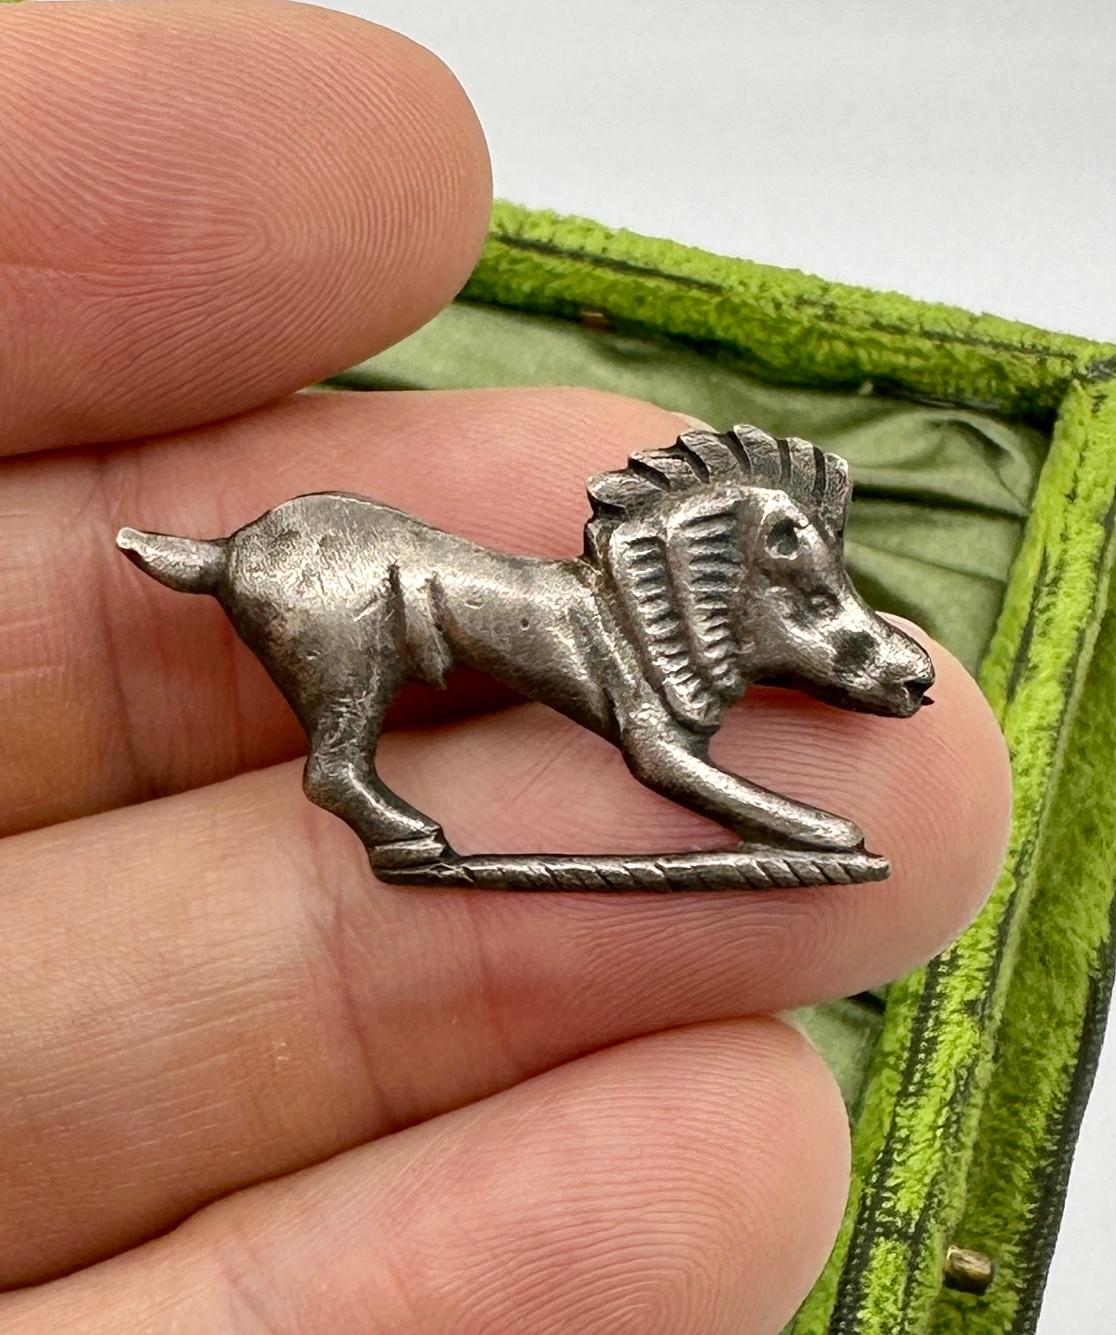 Unveil the elegance of antiquity with this Ancient Roman Silver Boar Fibula Brooch, dating from the 1st to 2nd century AD (1-200 AD).   The finely crafted ancient artifact is a testament to Roman artistry.  The brooch features an exquisite cast